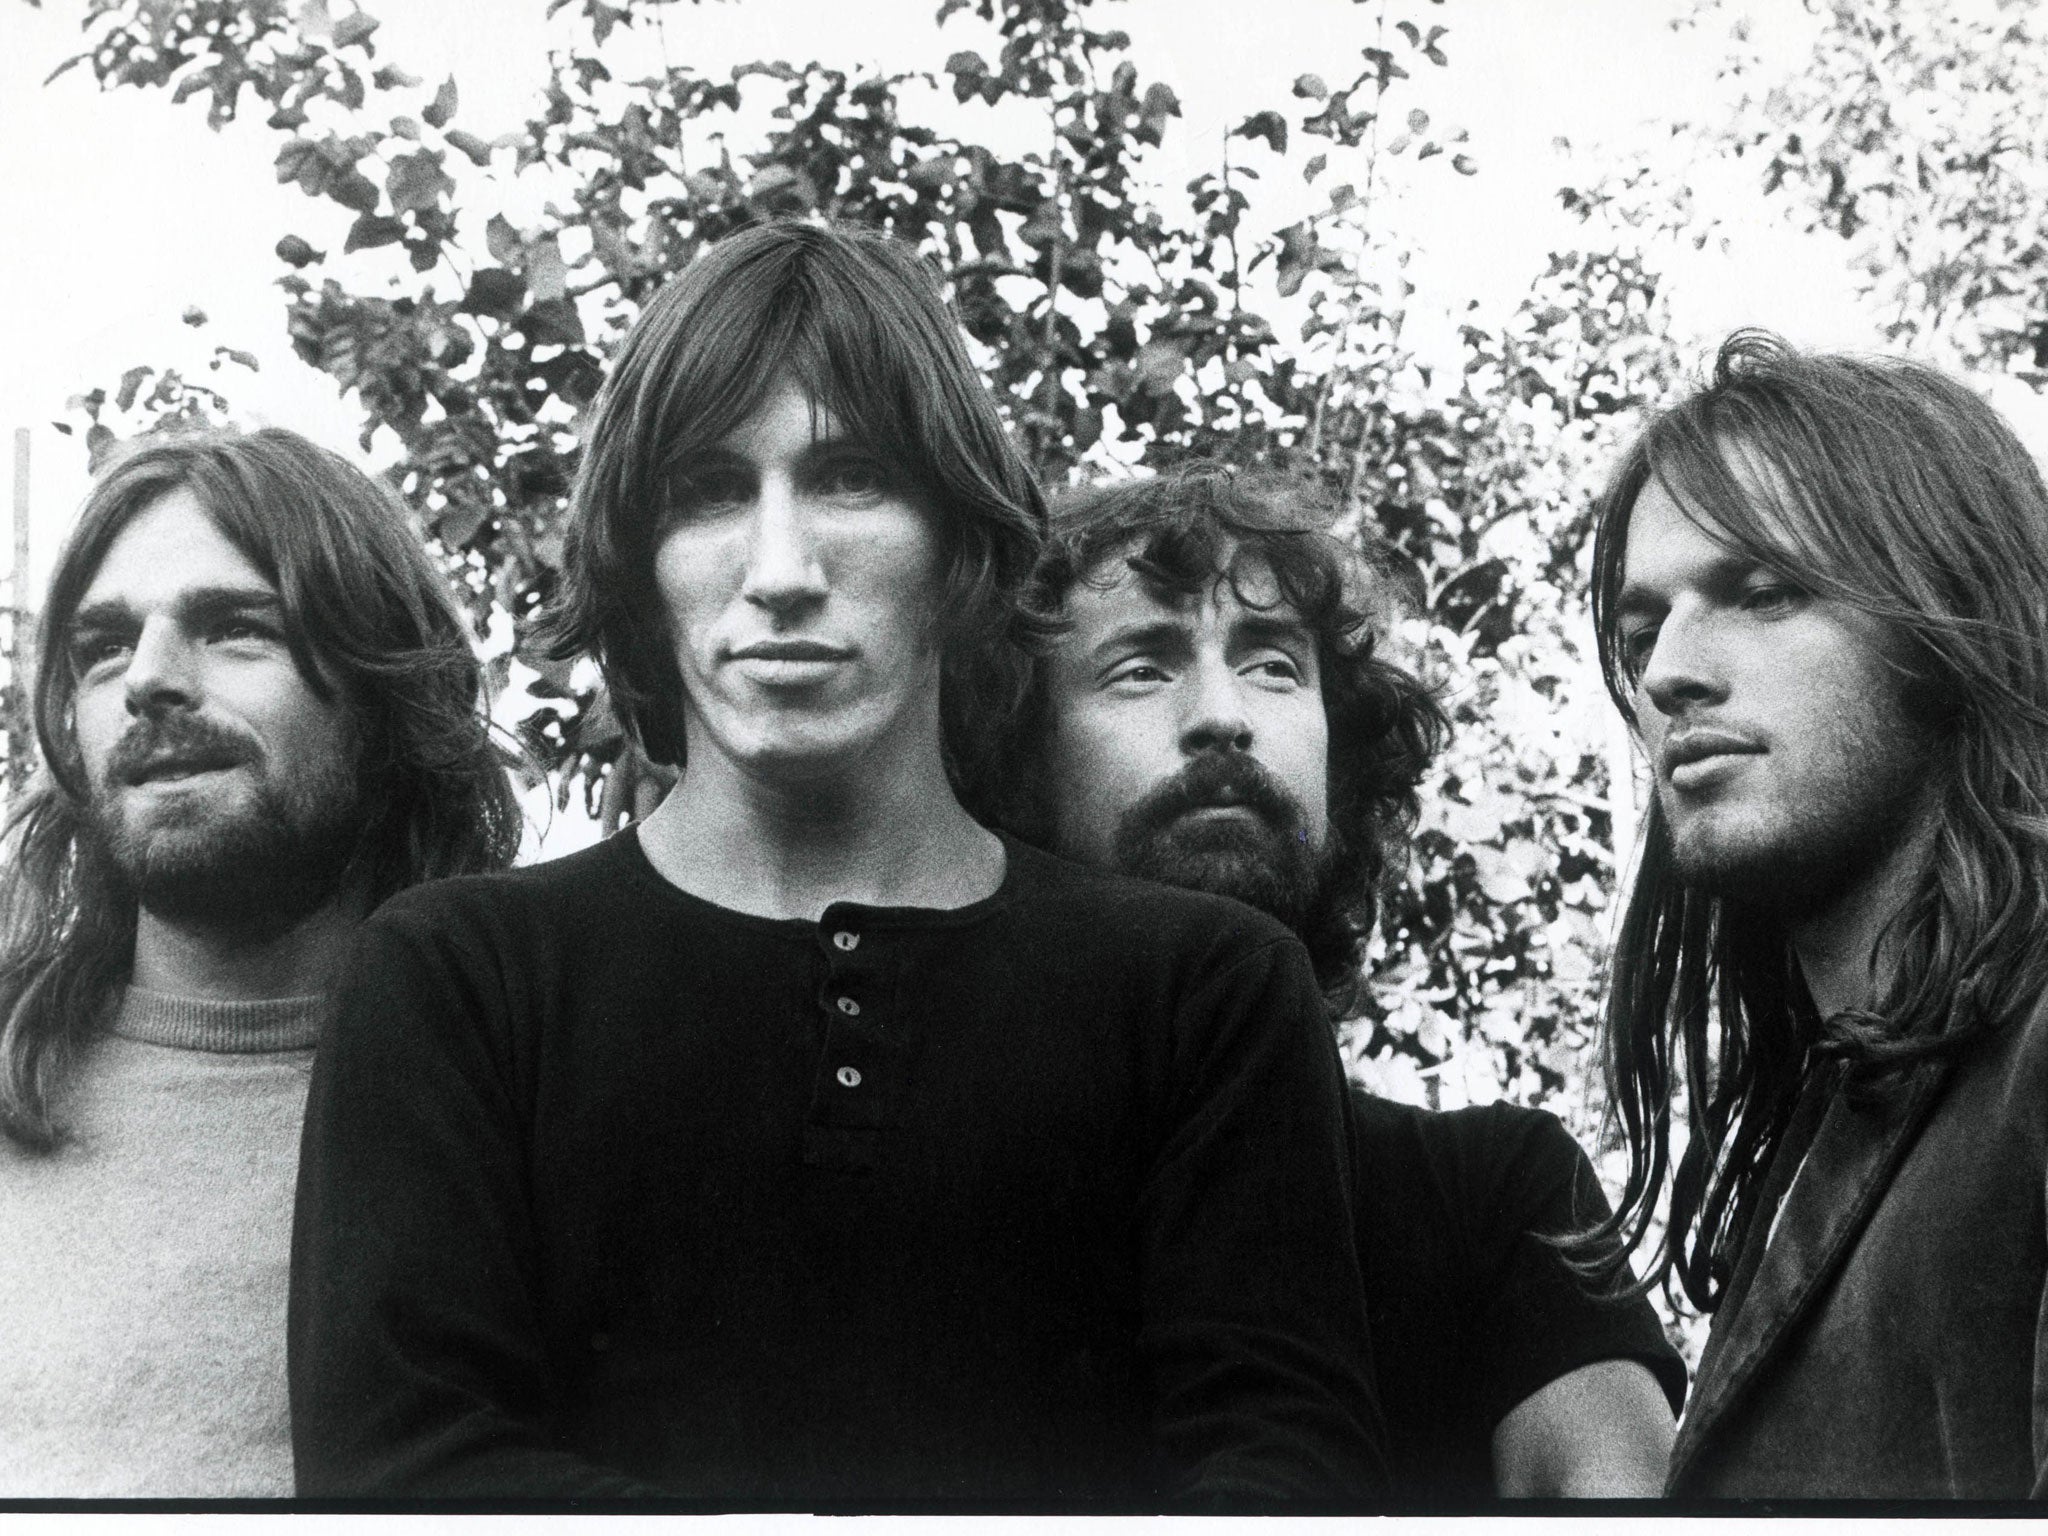 The band back in 1973